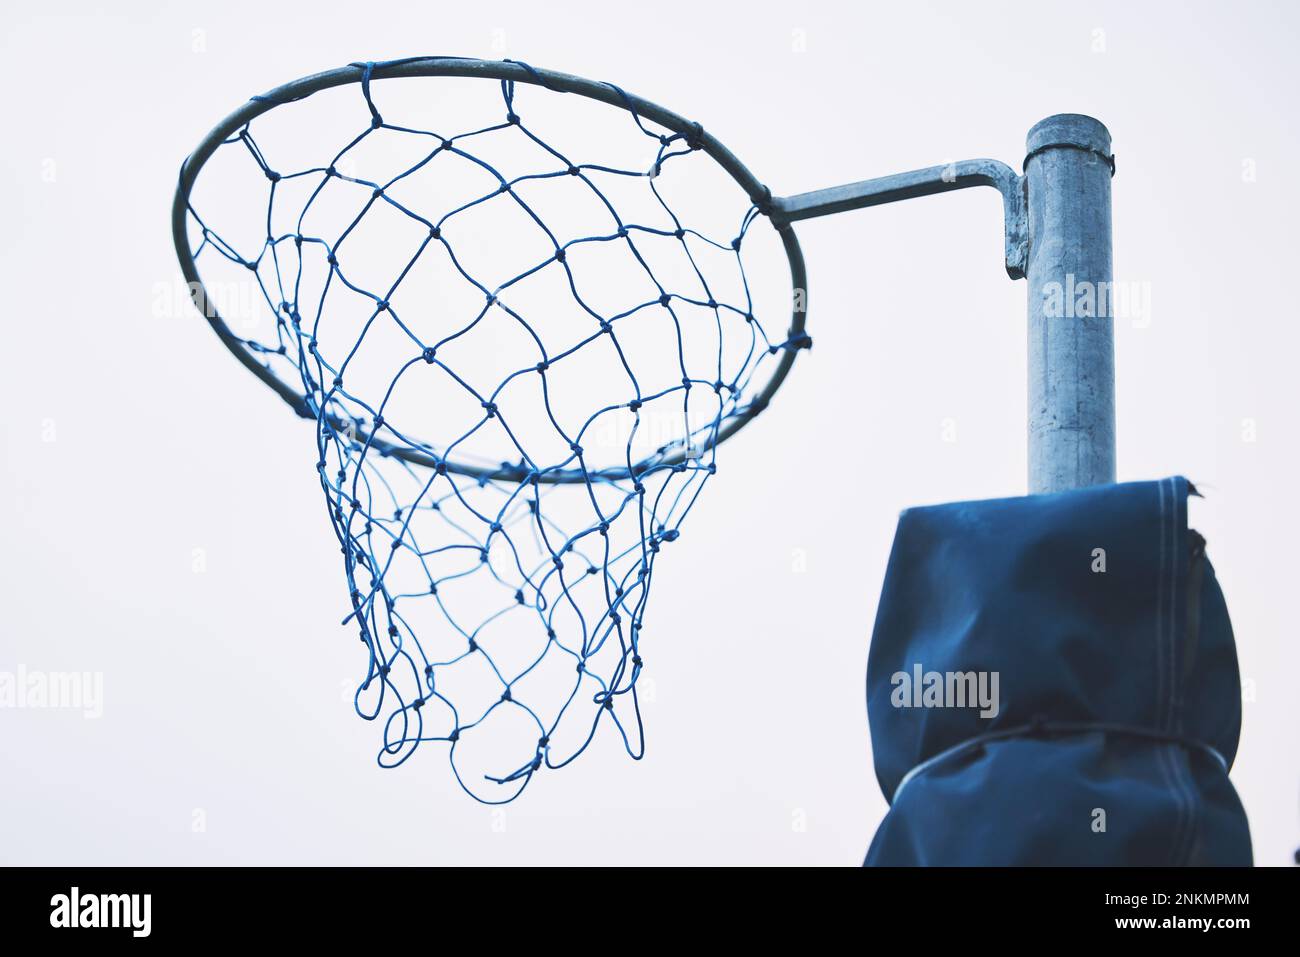 Sports, basketball and netball hoop for training, fitness and a game at school or in public. Rim, play and equipment for a sport in the air for Stock Photo